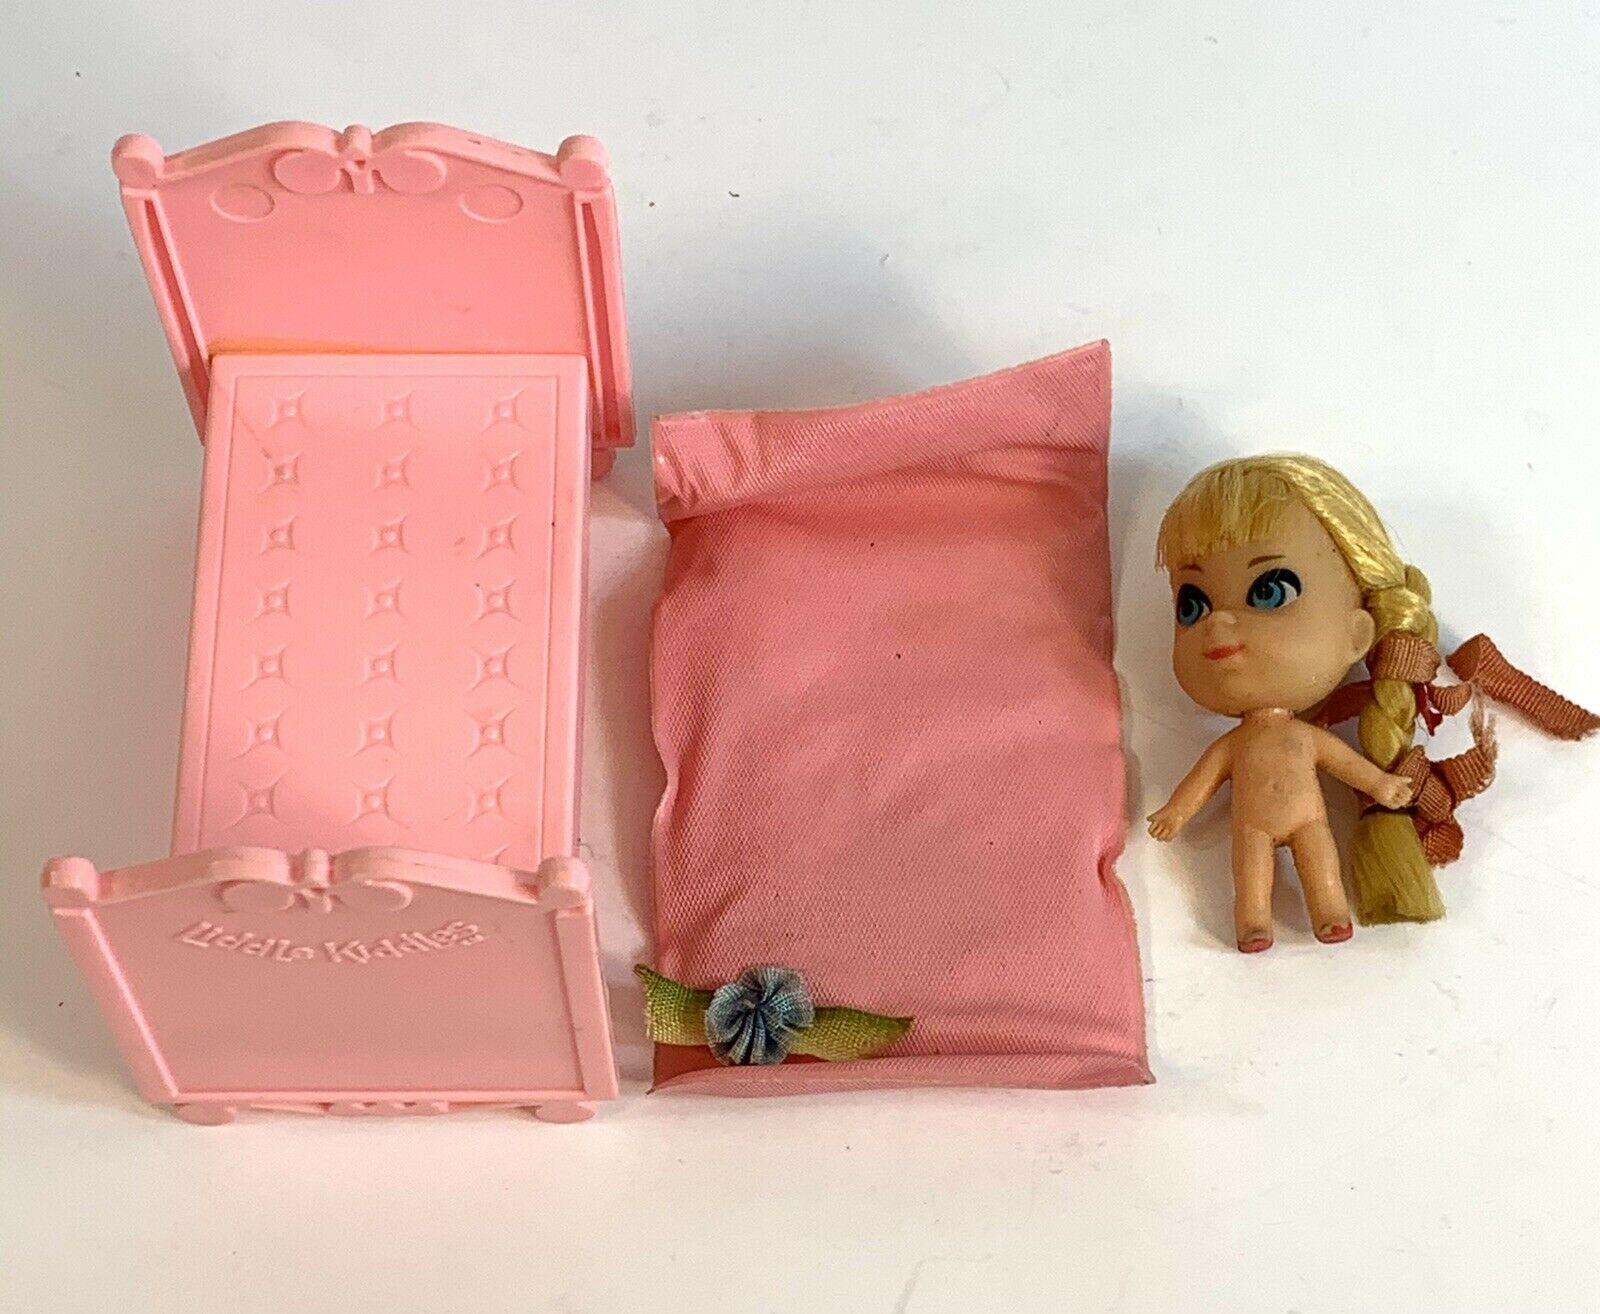 Liddle  Kiddle Mattel Toys Doll Lucky Locket Lorna? W/pink Plastic Bed And Cover